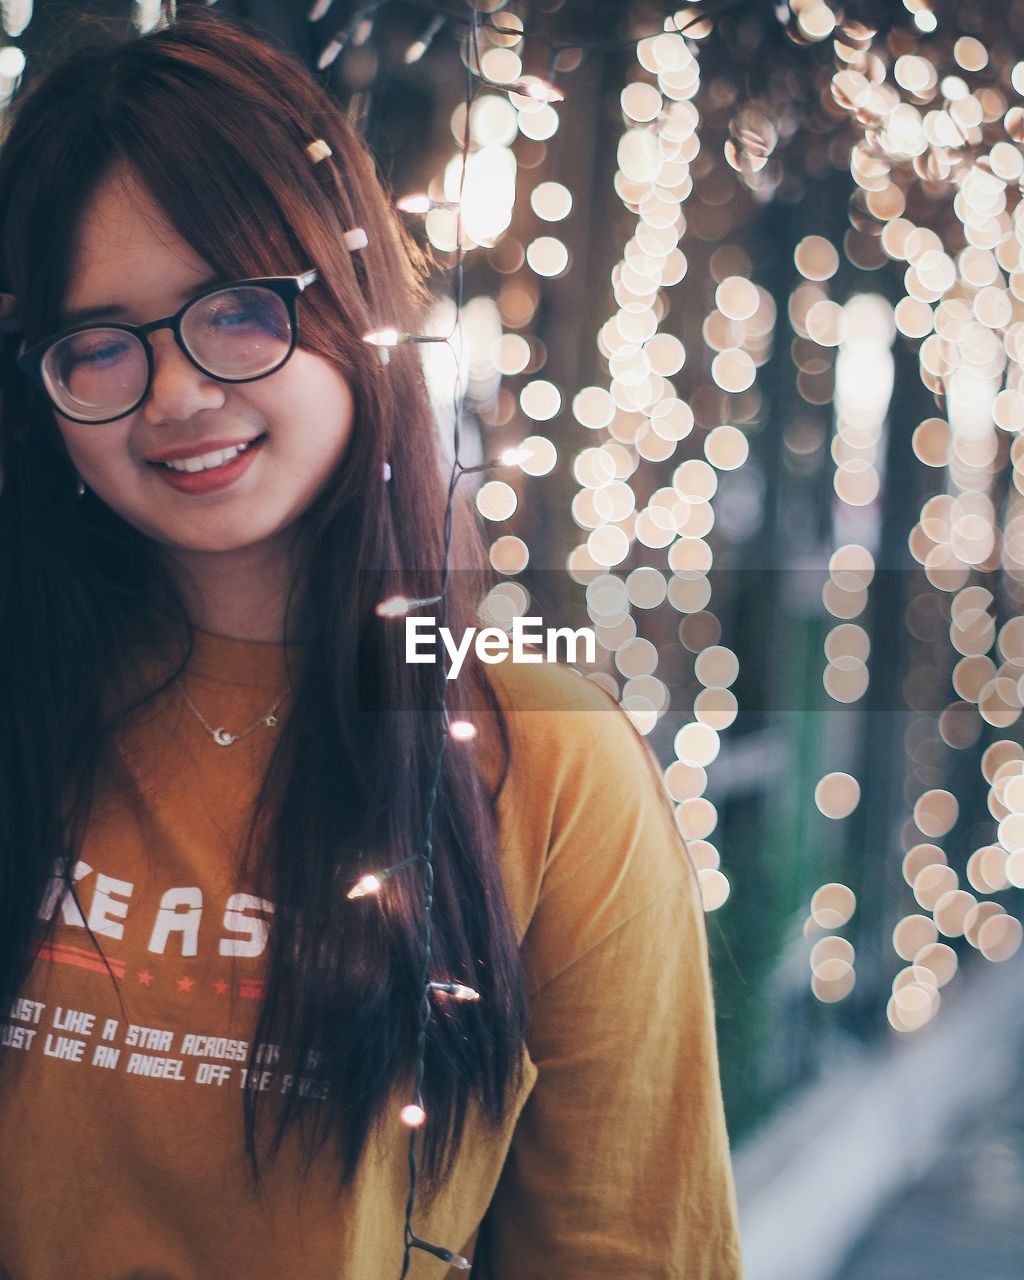 PORTRAIT OF A SMILING YOUNG WOMAN WEARING EYEGLASSES